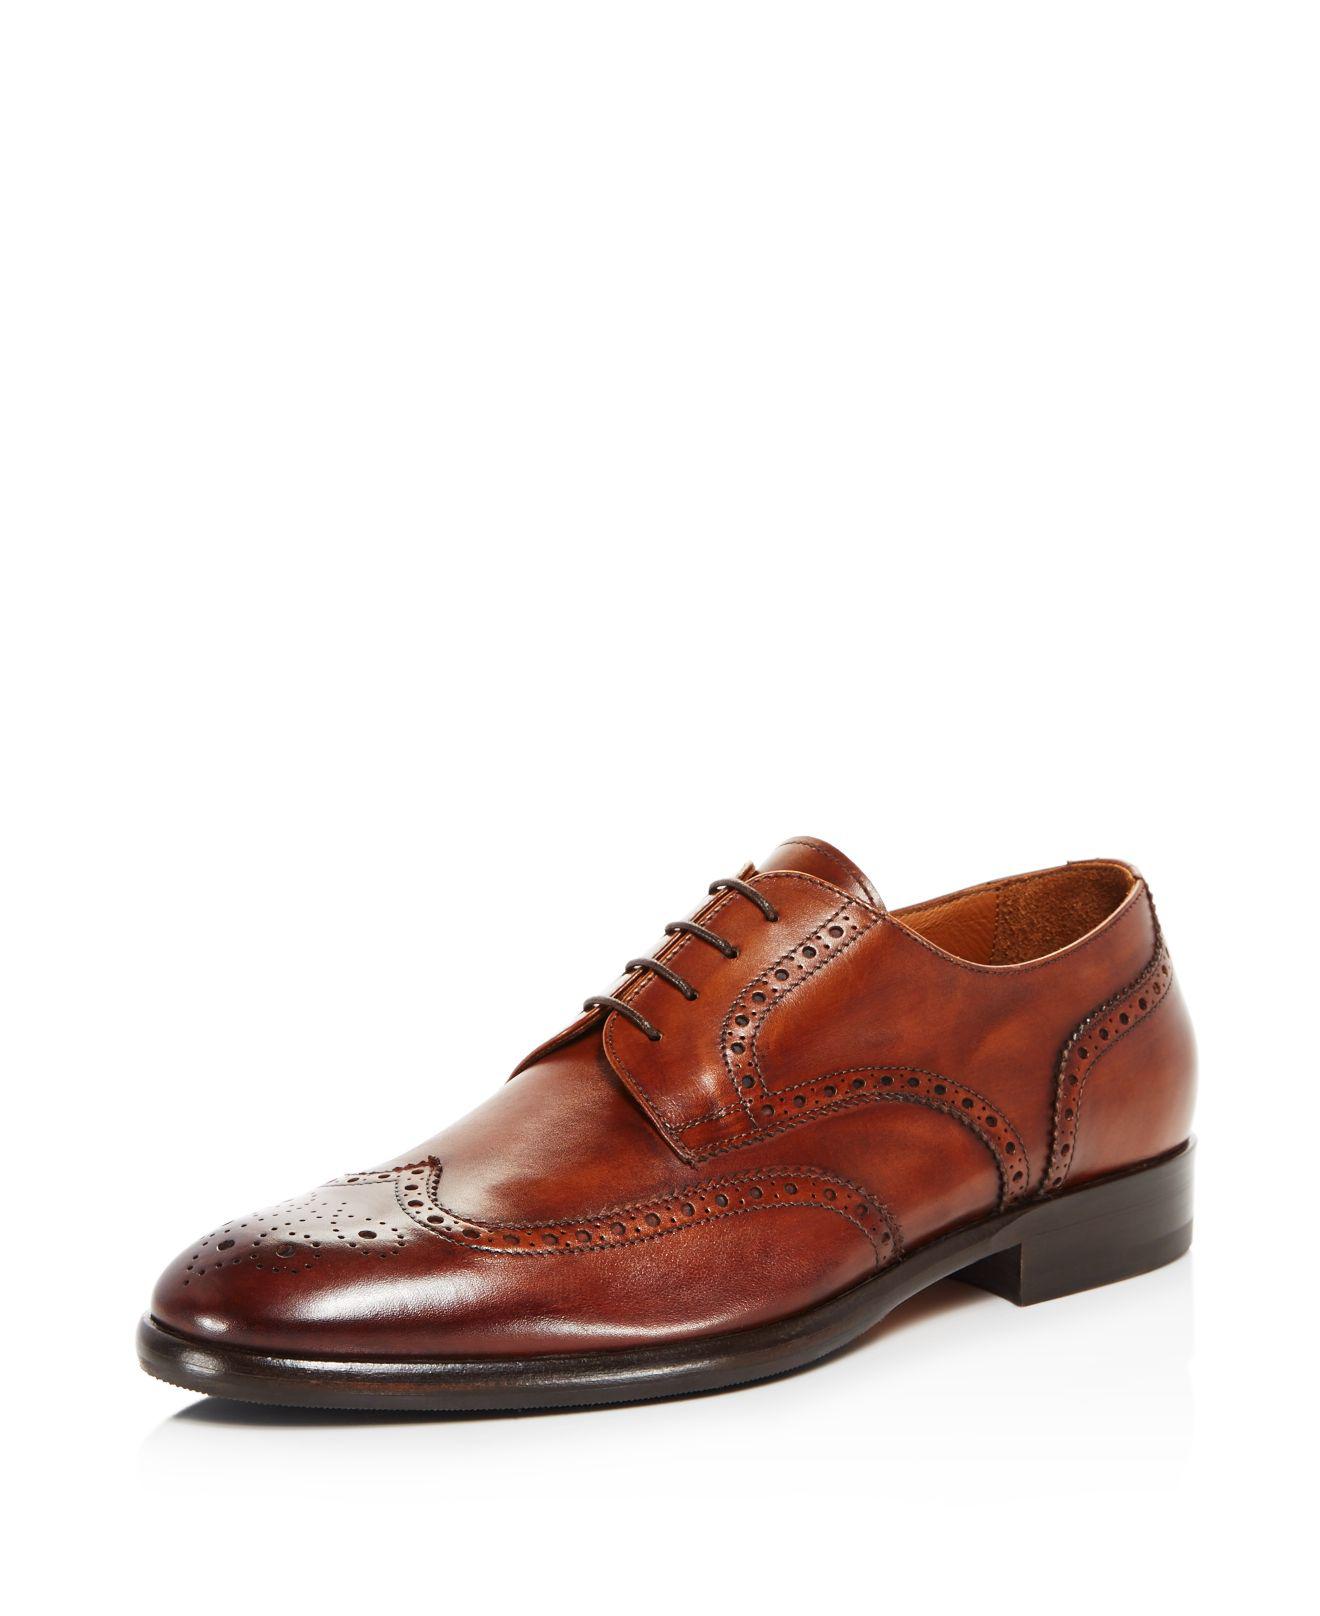 Bruno Magli Men's Parma Lace Up Derby Shoes in Cognac Tan (Brown) for ...